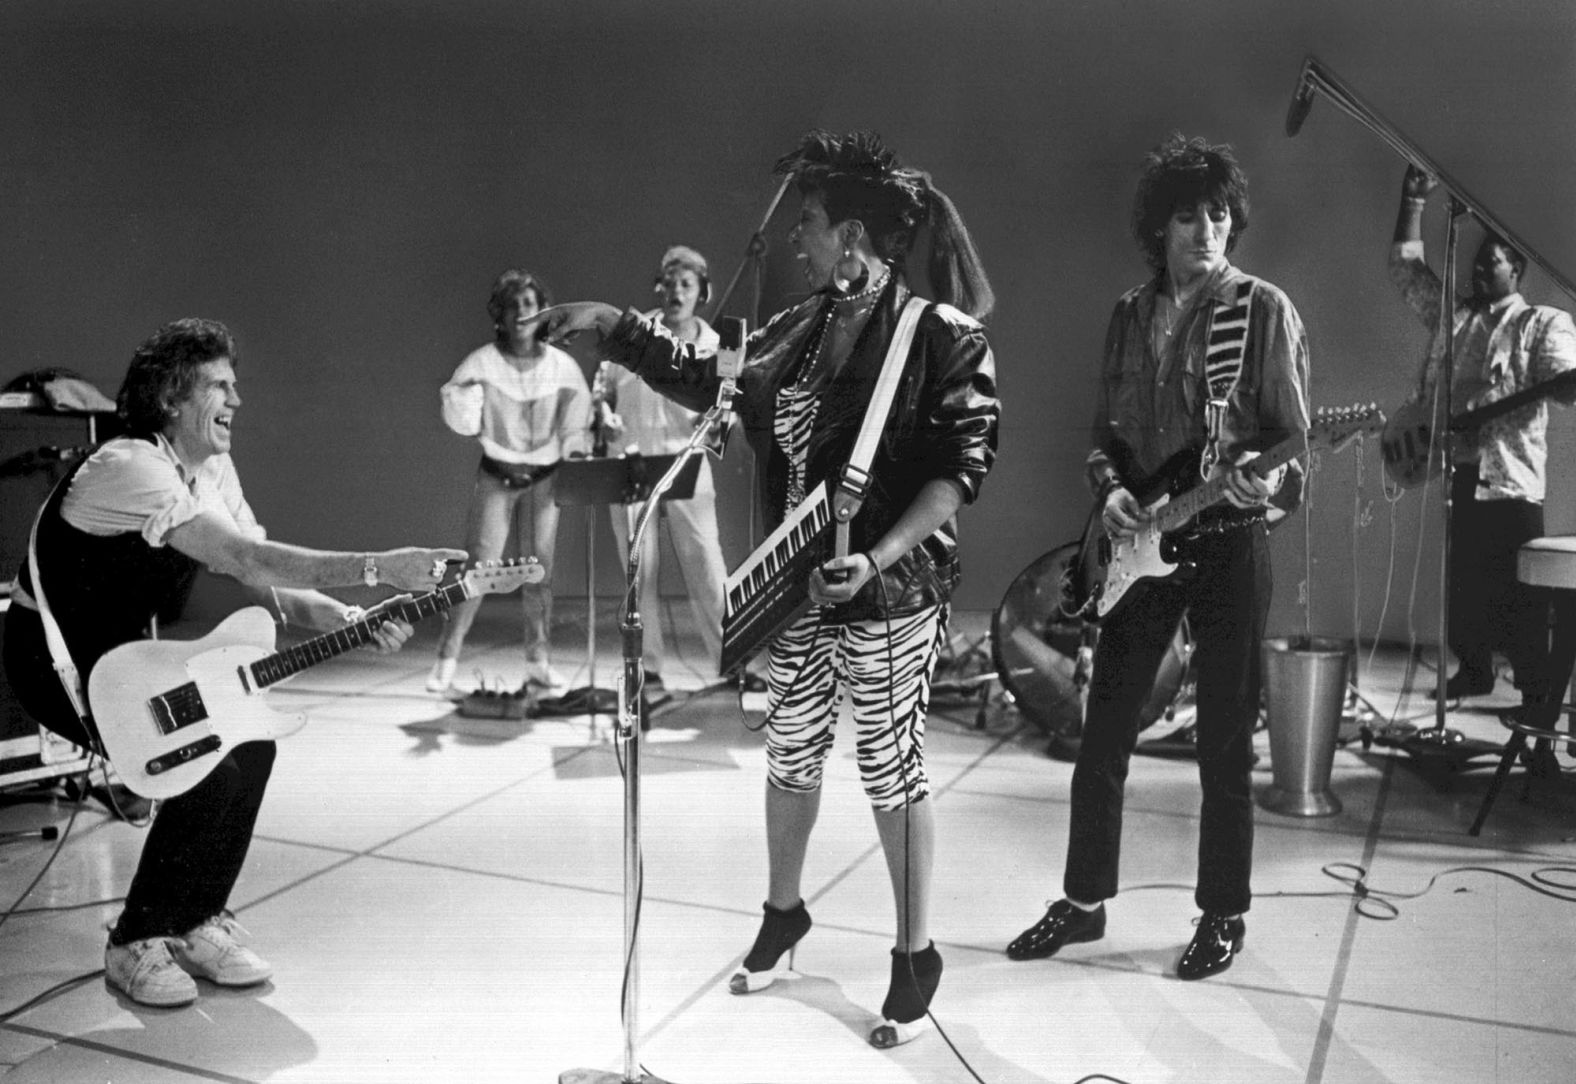 Franklin performs "Jumpin' Jack Flash" with Keith Richards and Ron Wood of the Rolling Stones in 1986.